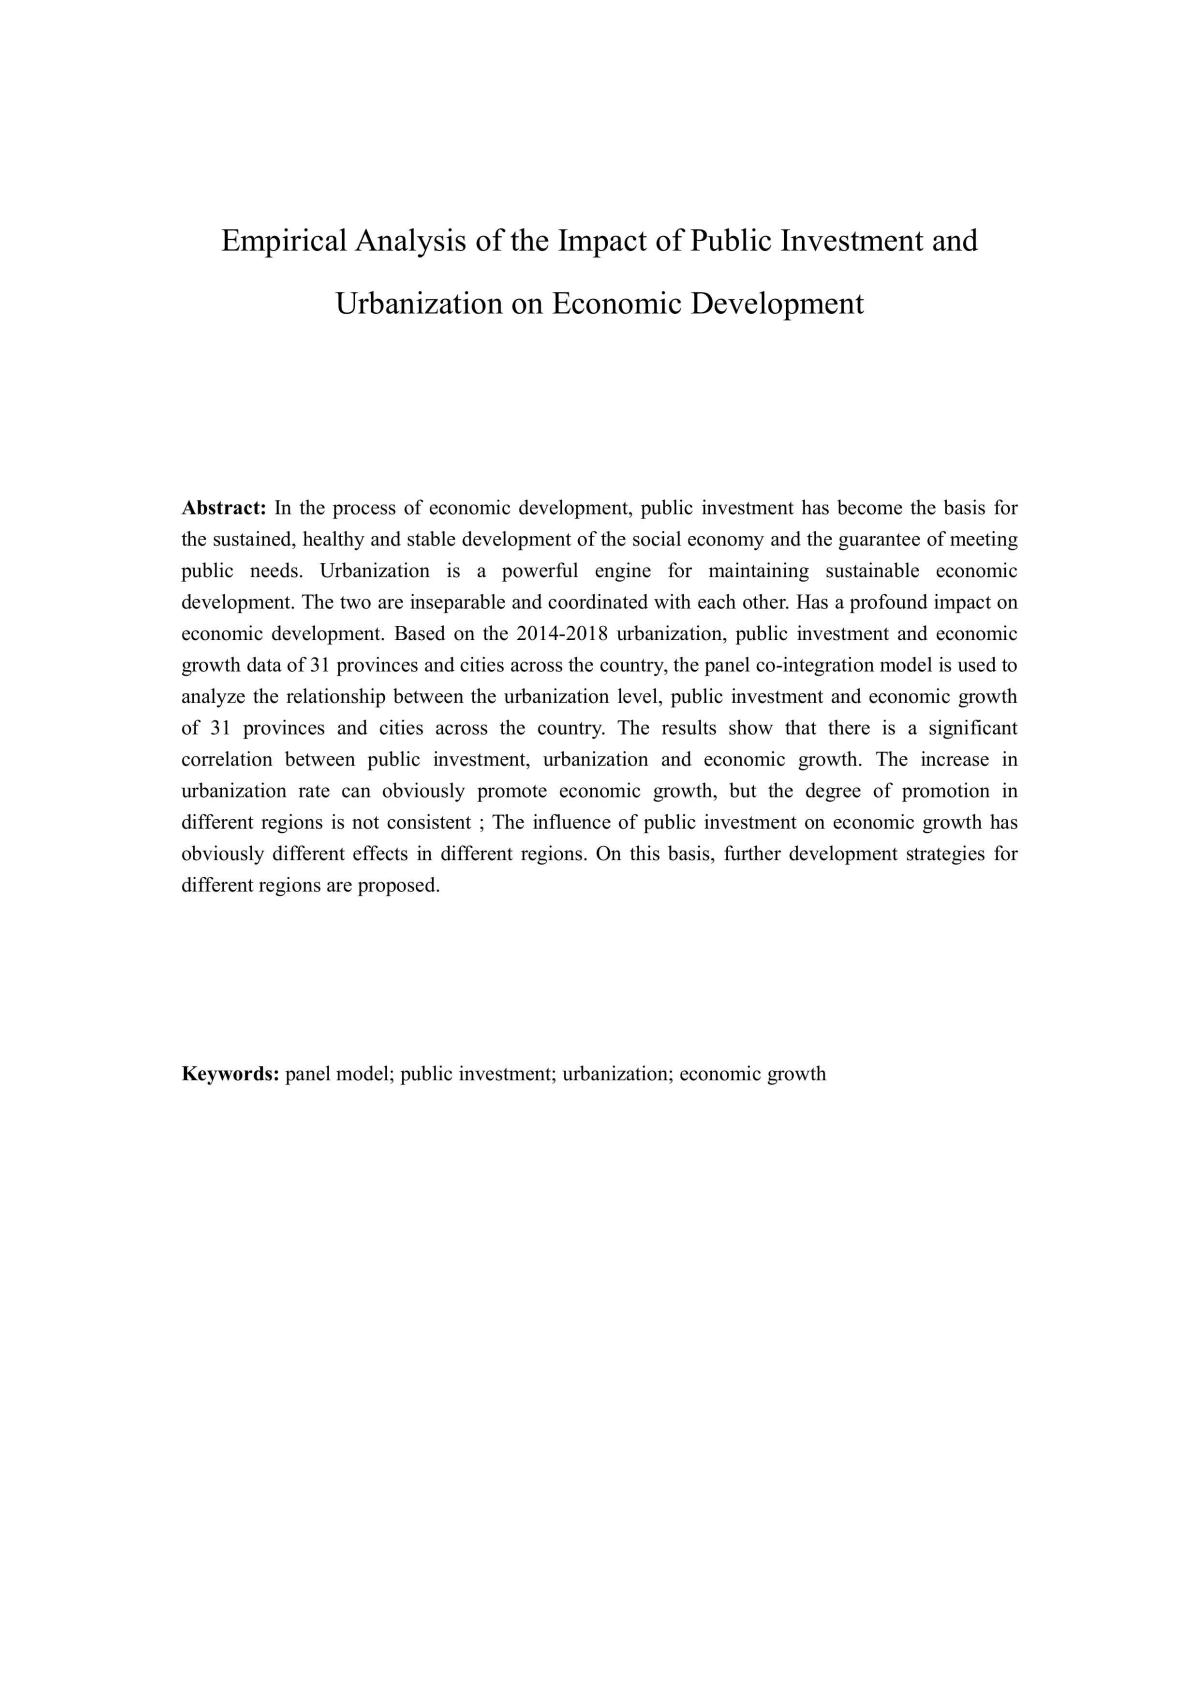  Empirical Analysis of the Impact of Public Investment and Urbanization on Economic Development - Page 1